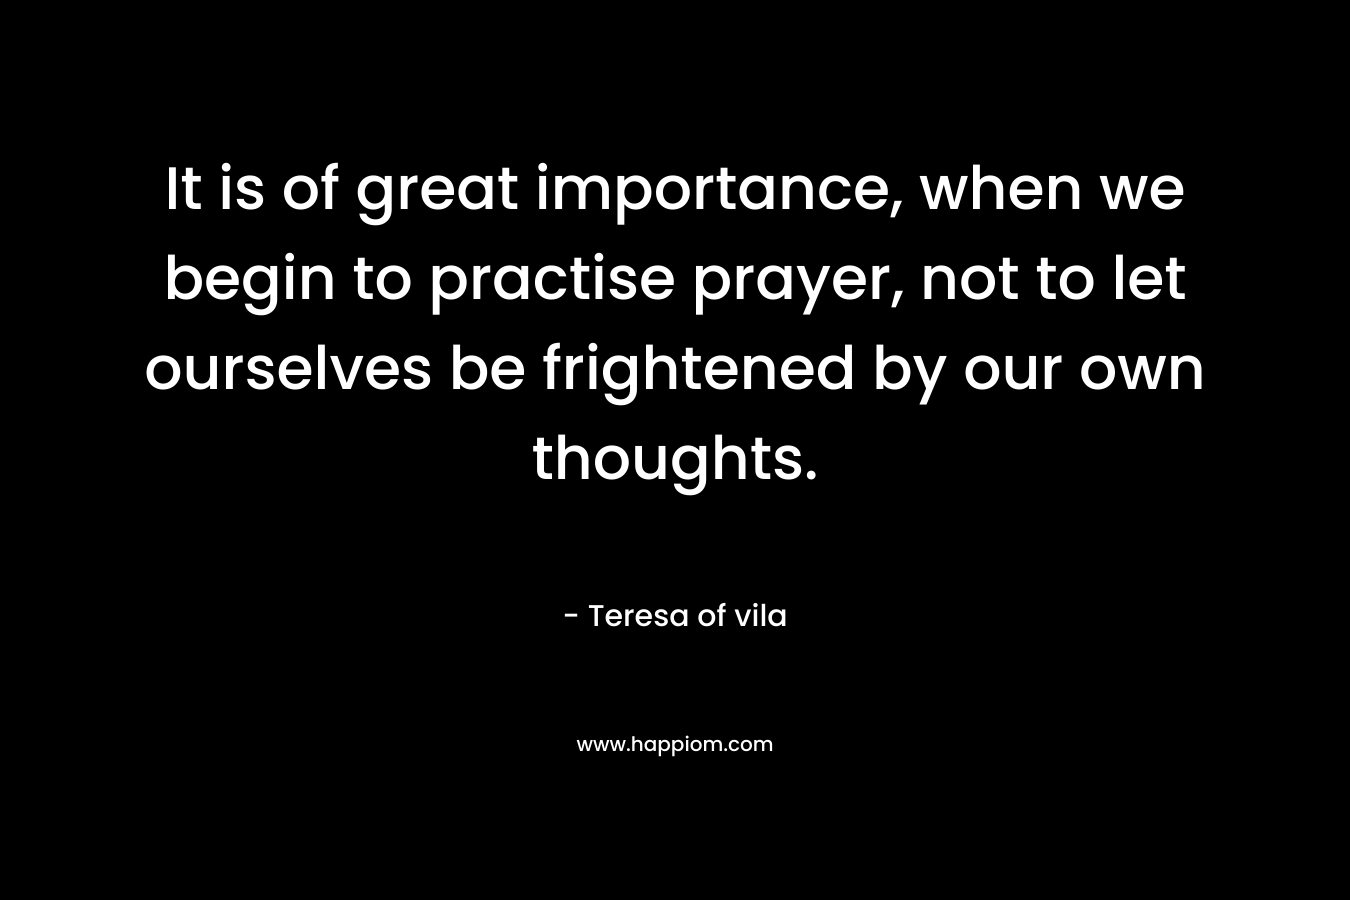 It is of great importance, when we begin to practise prayer, not to let ourselves be frightened by our own thoughts. – Teresa of vila